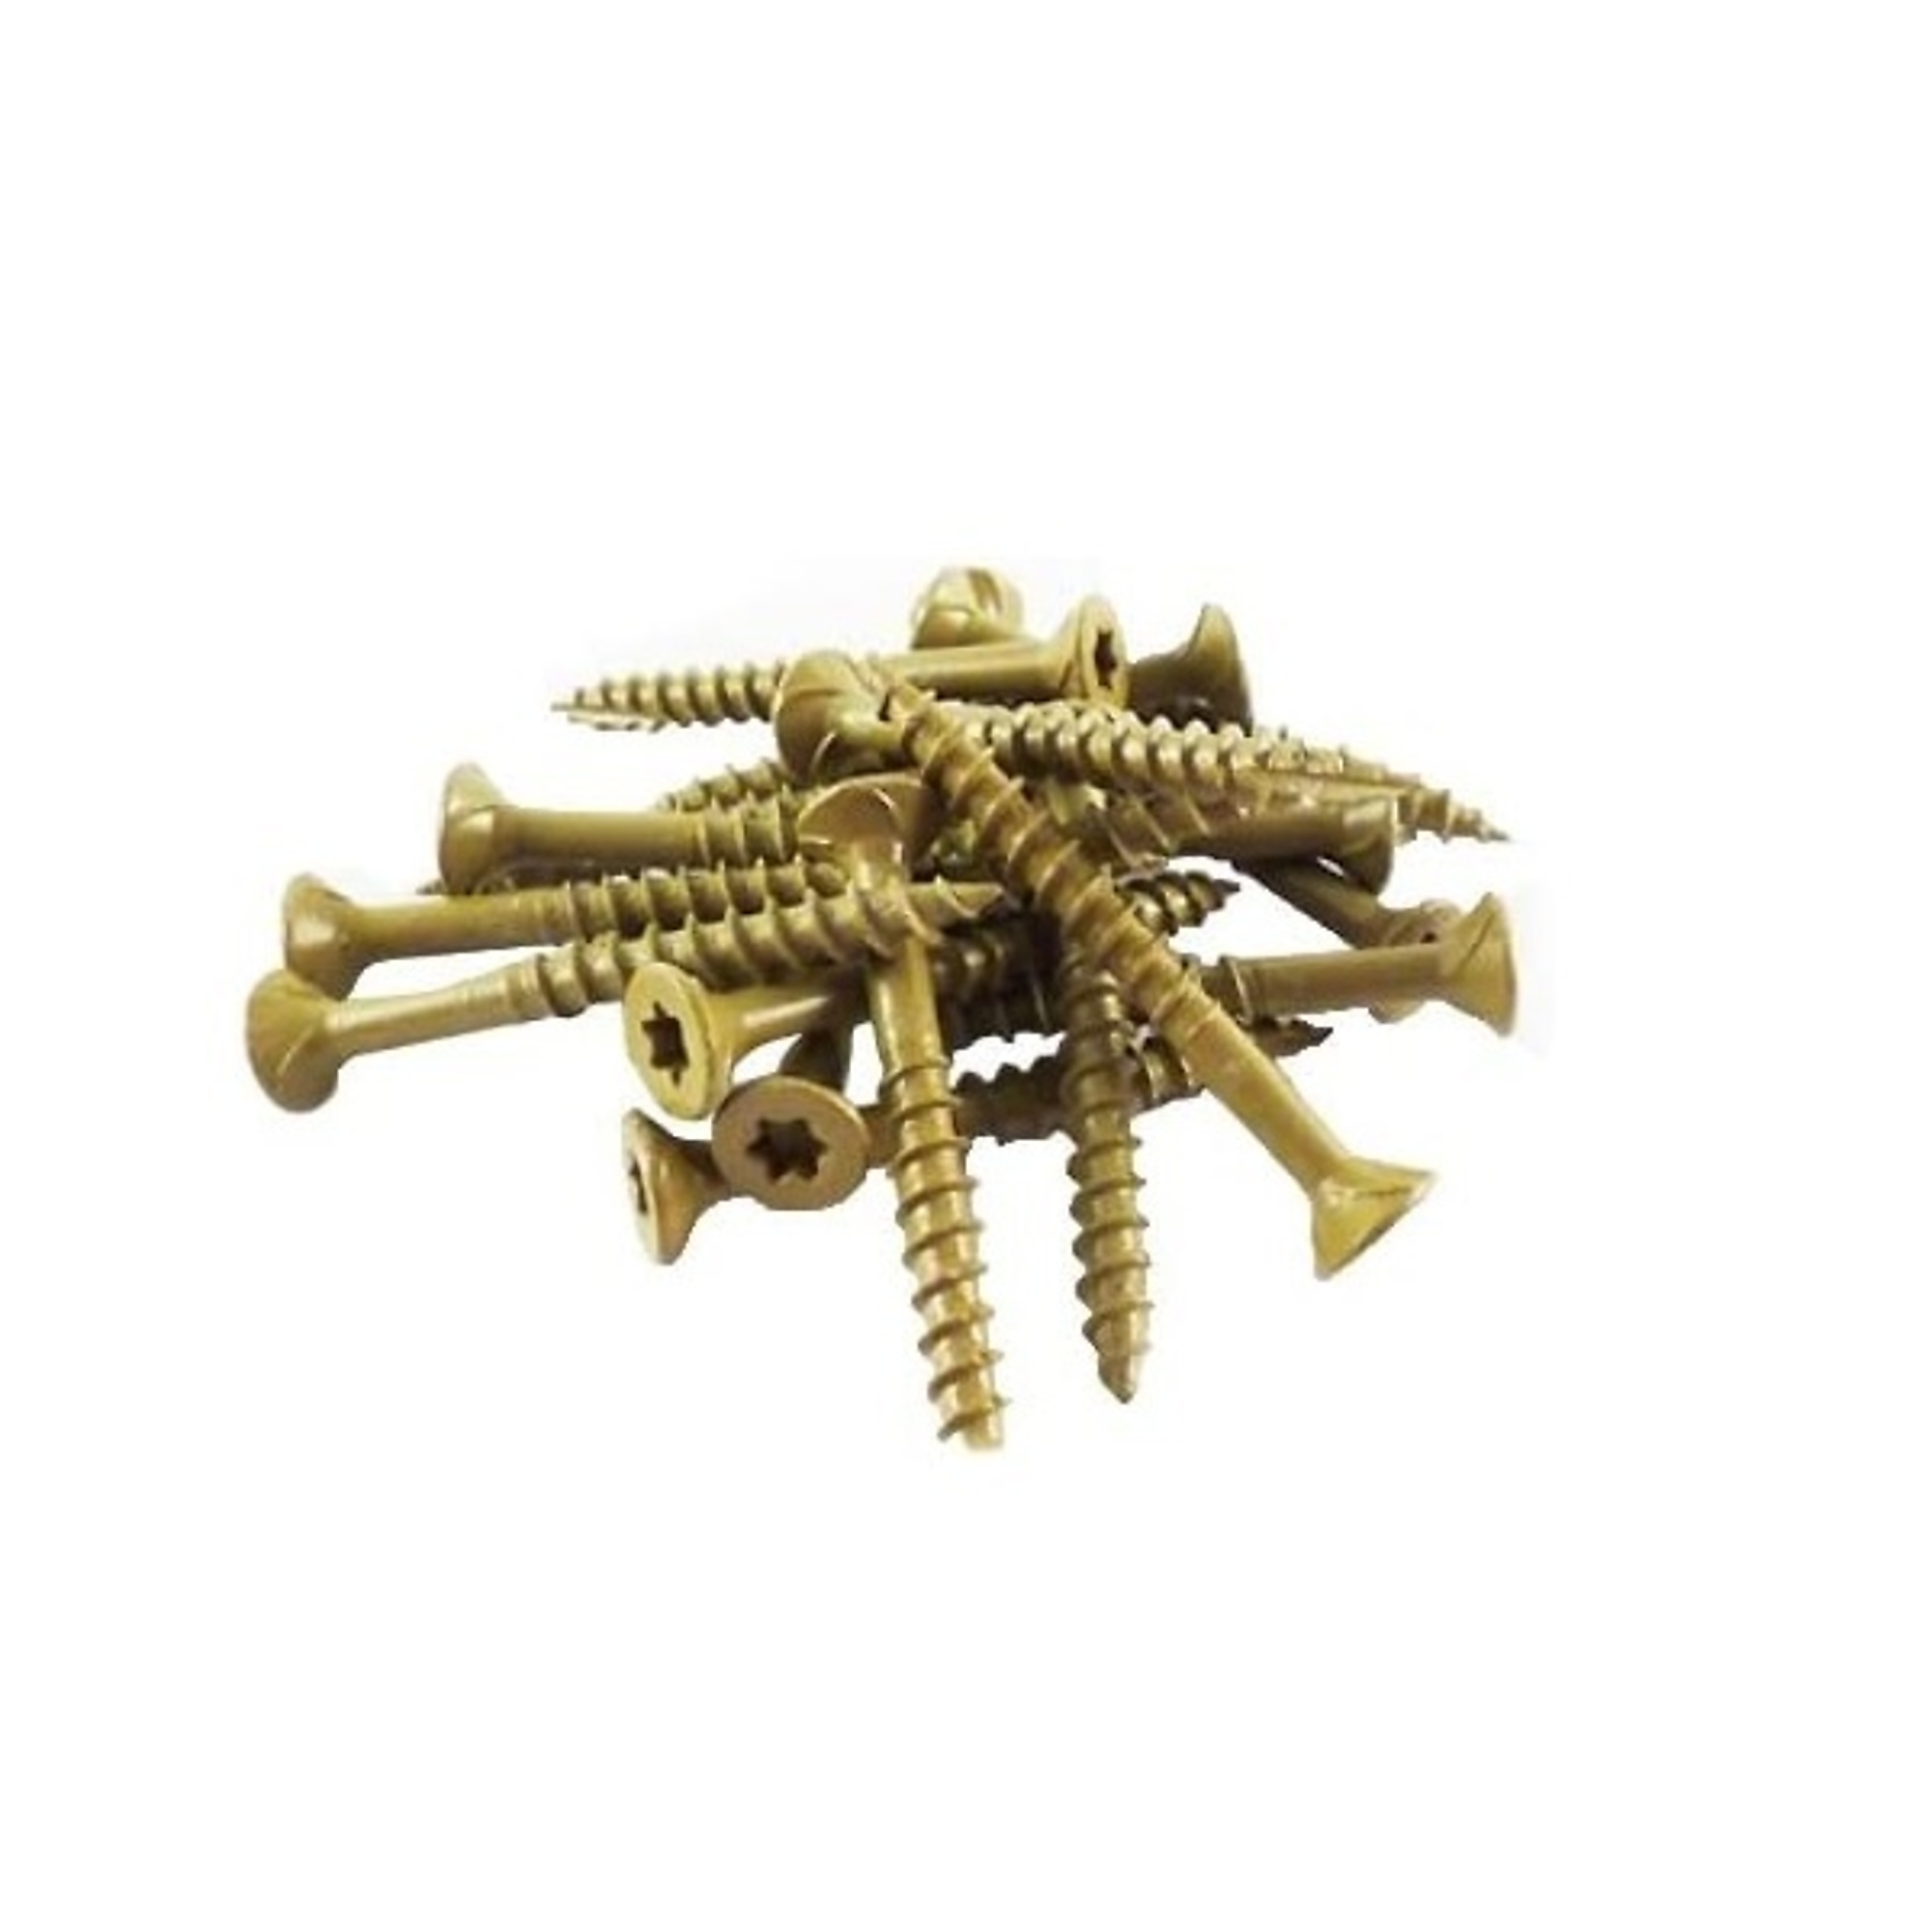 Woodpro, T20 3500-Count 8 by 2 All Purpose Wood Screw, Model AP8X2-3.5M